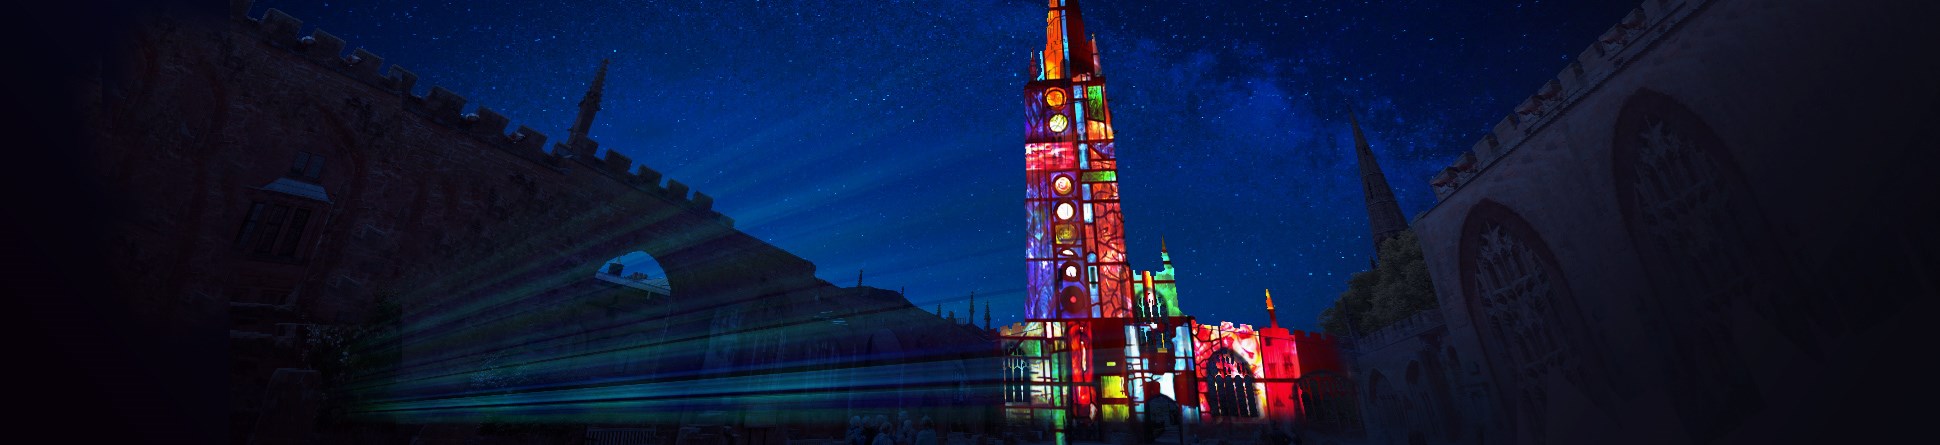 Artist's impression of light projections on Coventry Cathedral